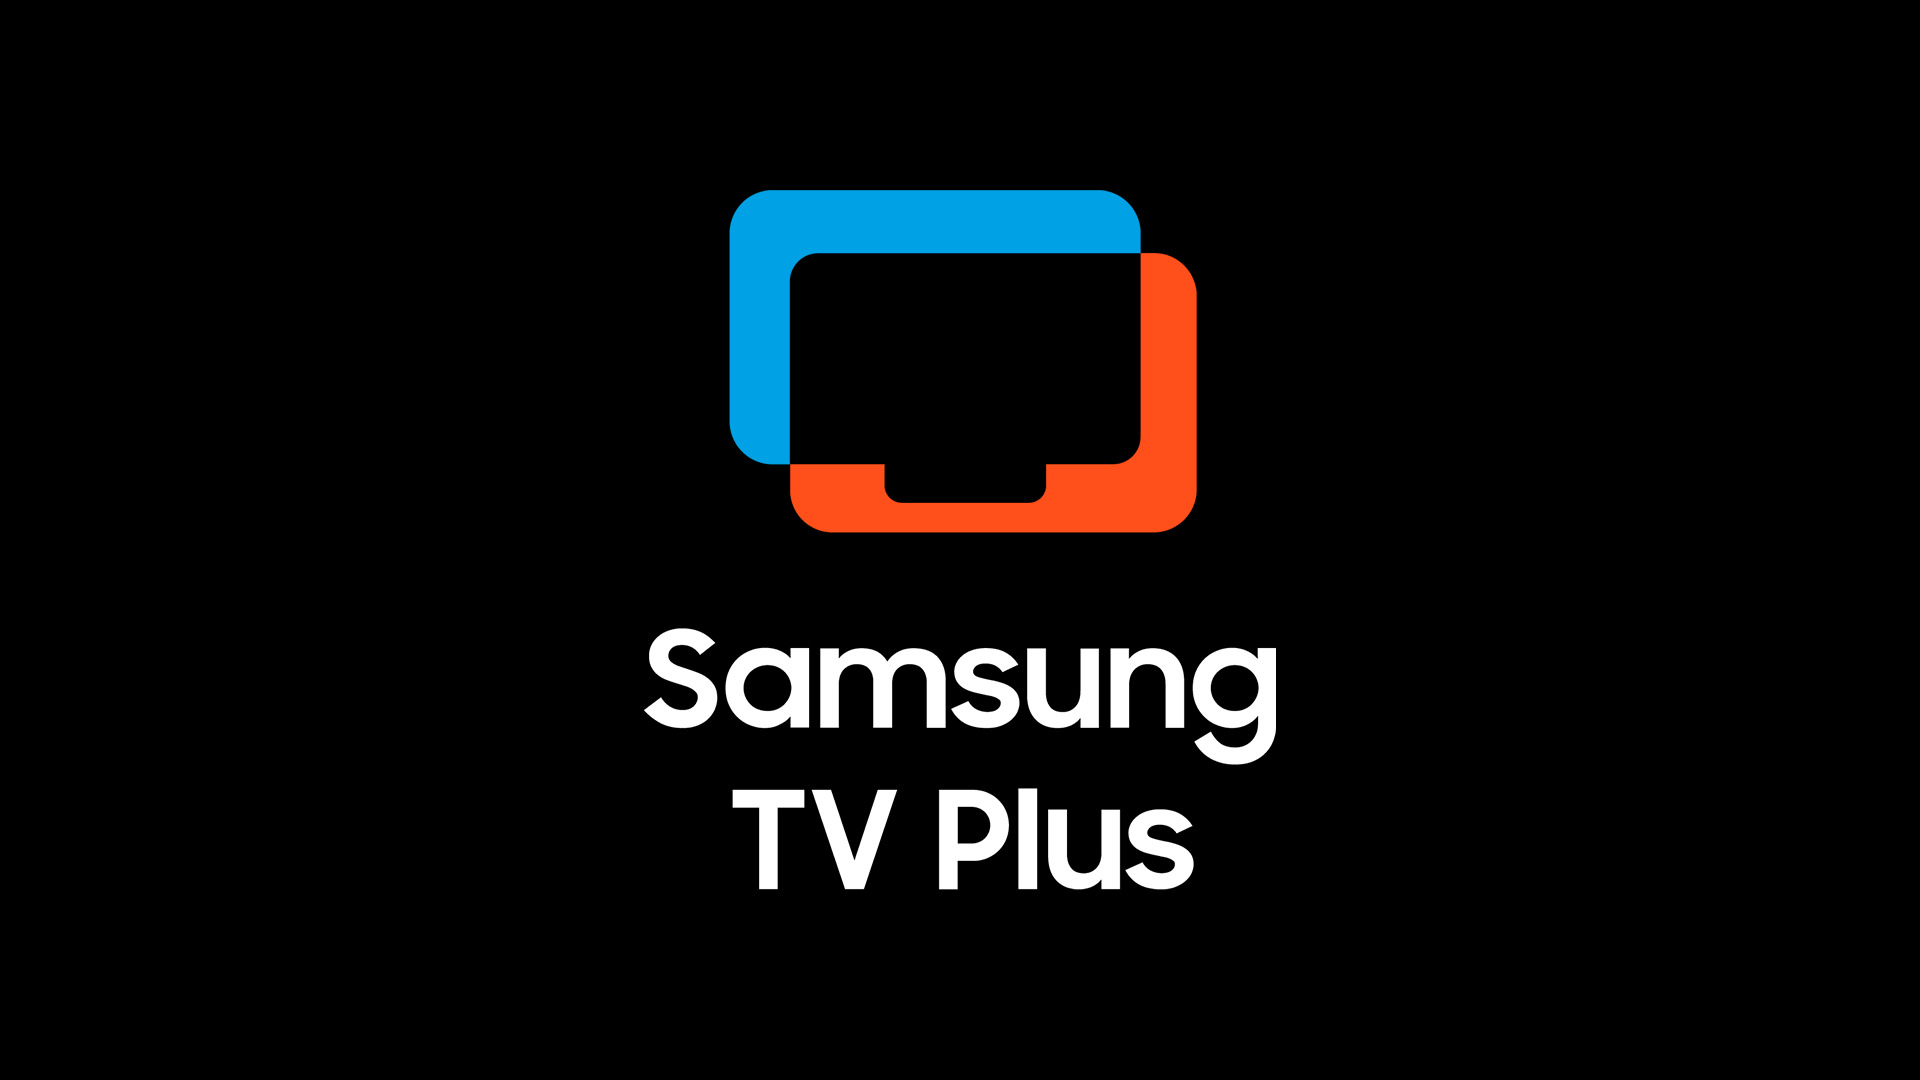 Samsung TV Plus Will Stream FIFA Content For Free With FIFA+